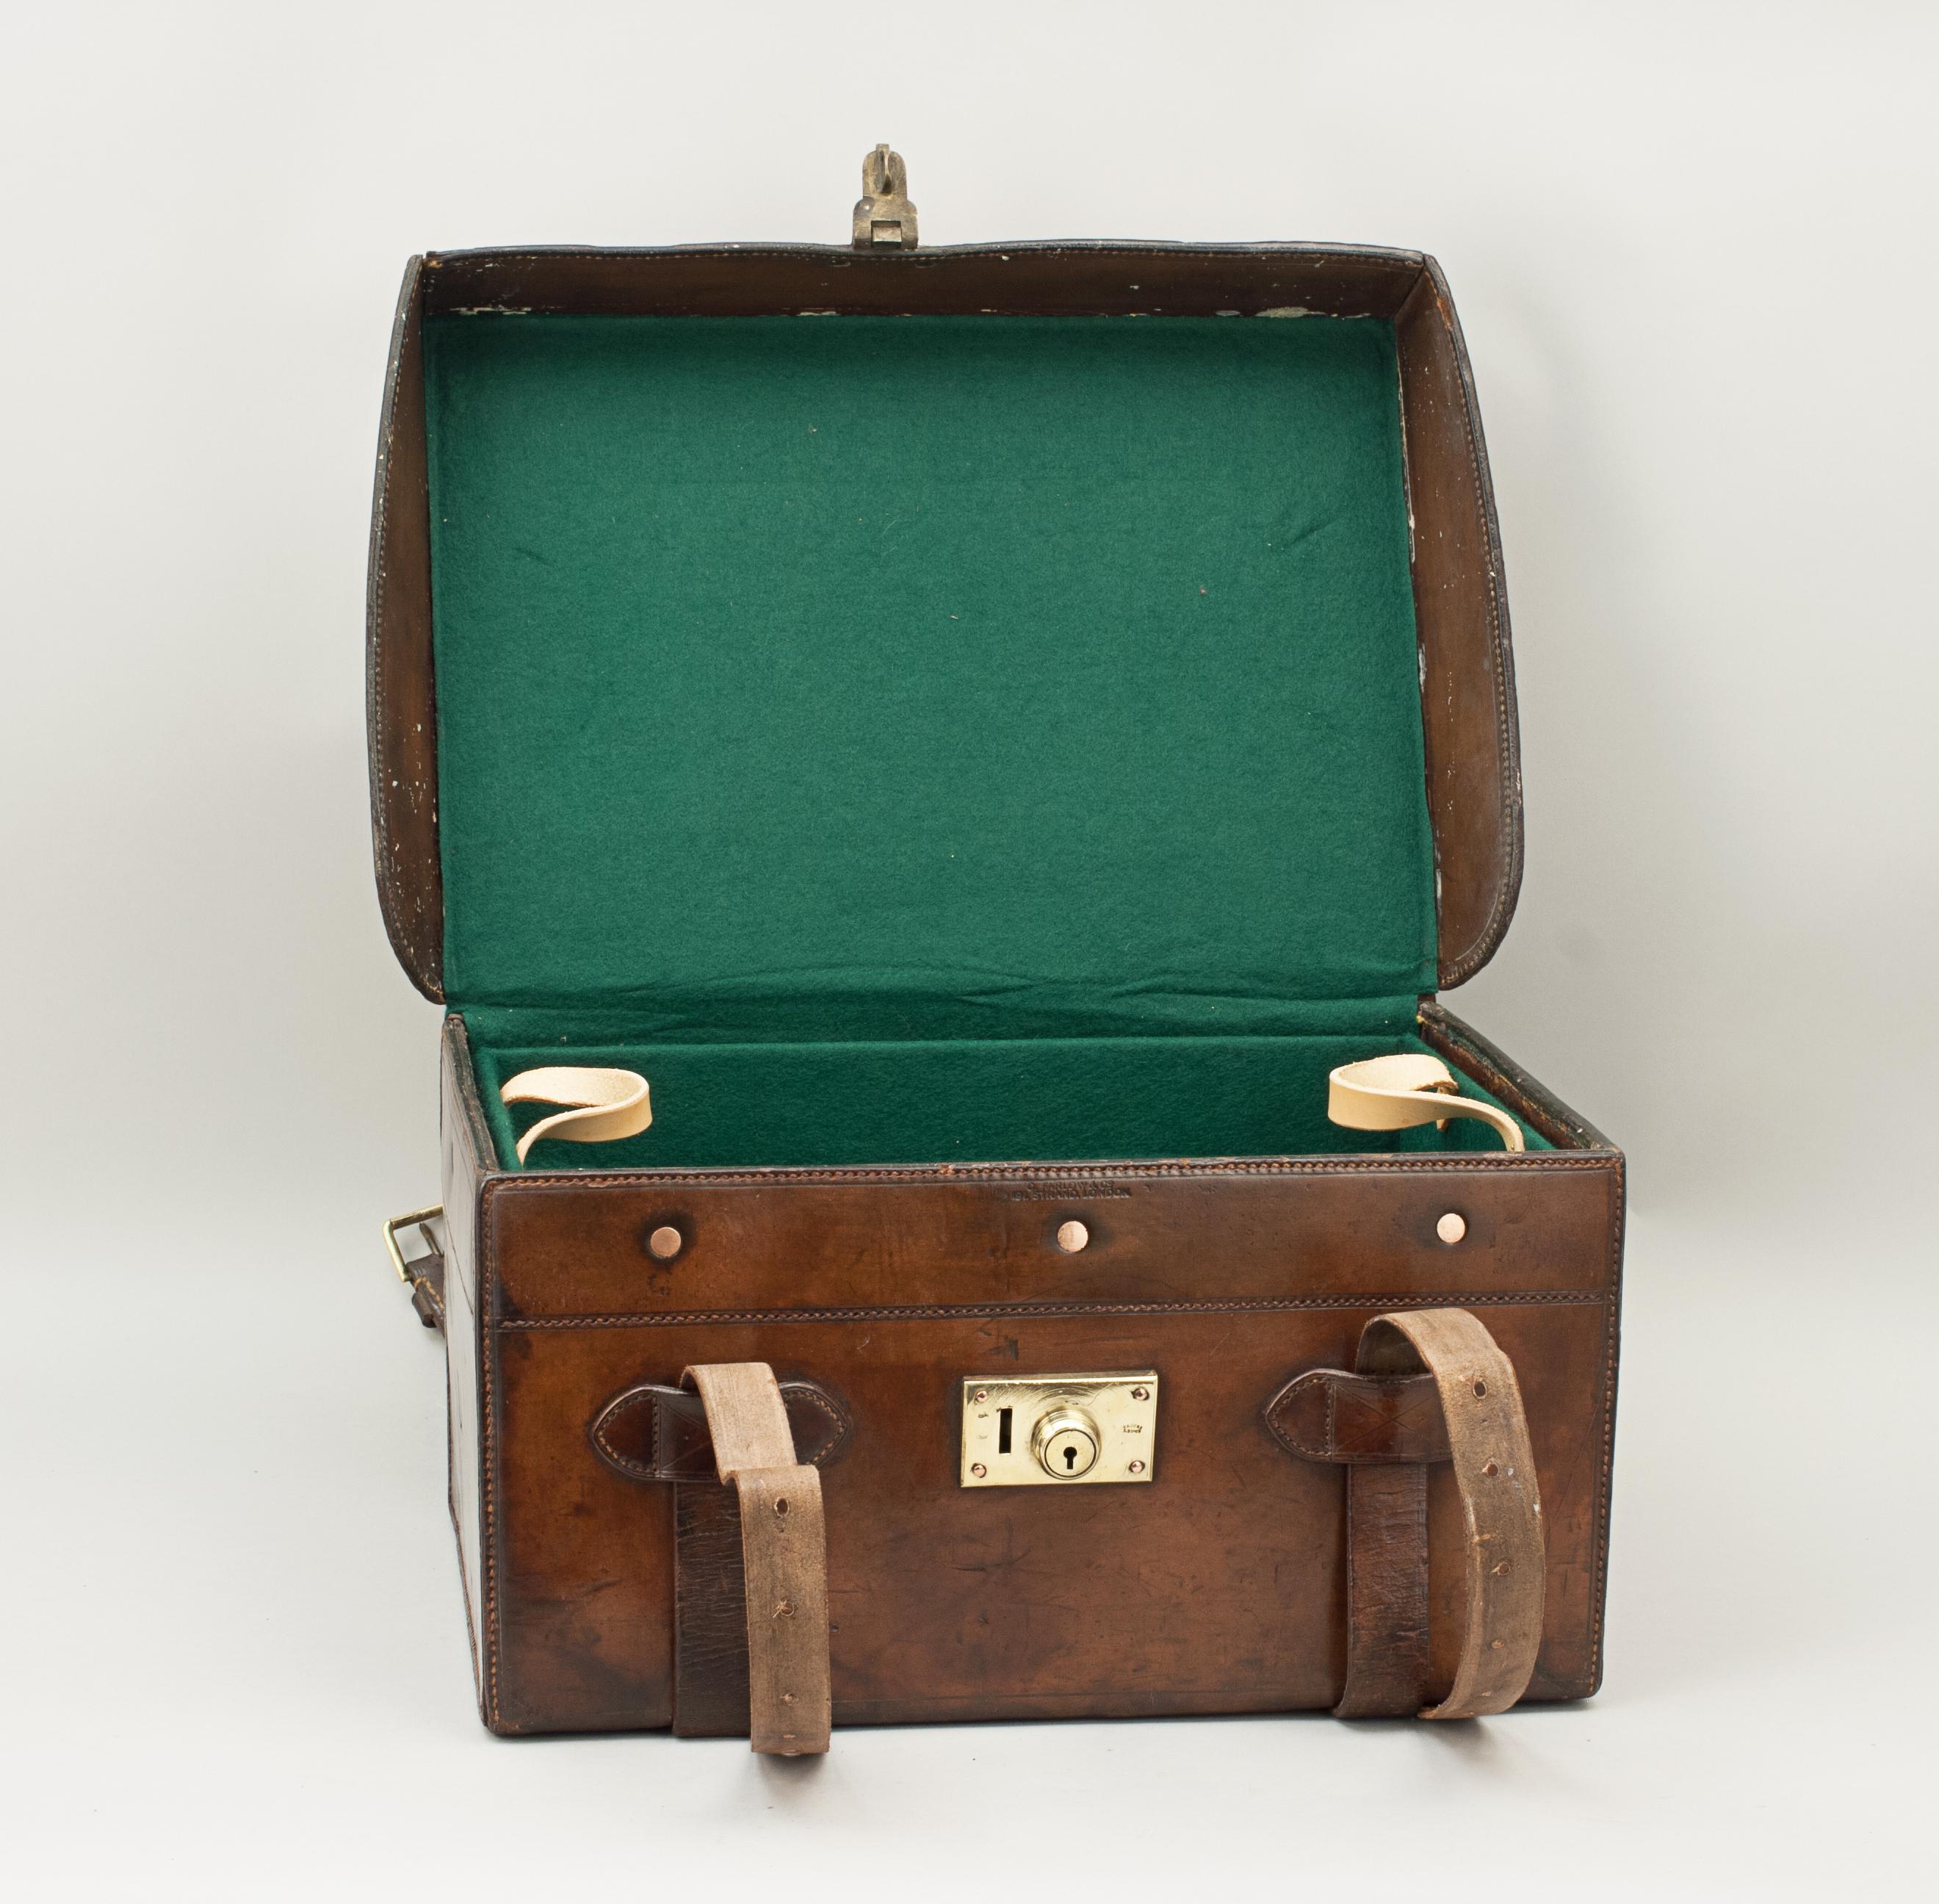 Early 20th Century Leather Farlow Fishing Tackle Case with Tray